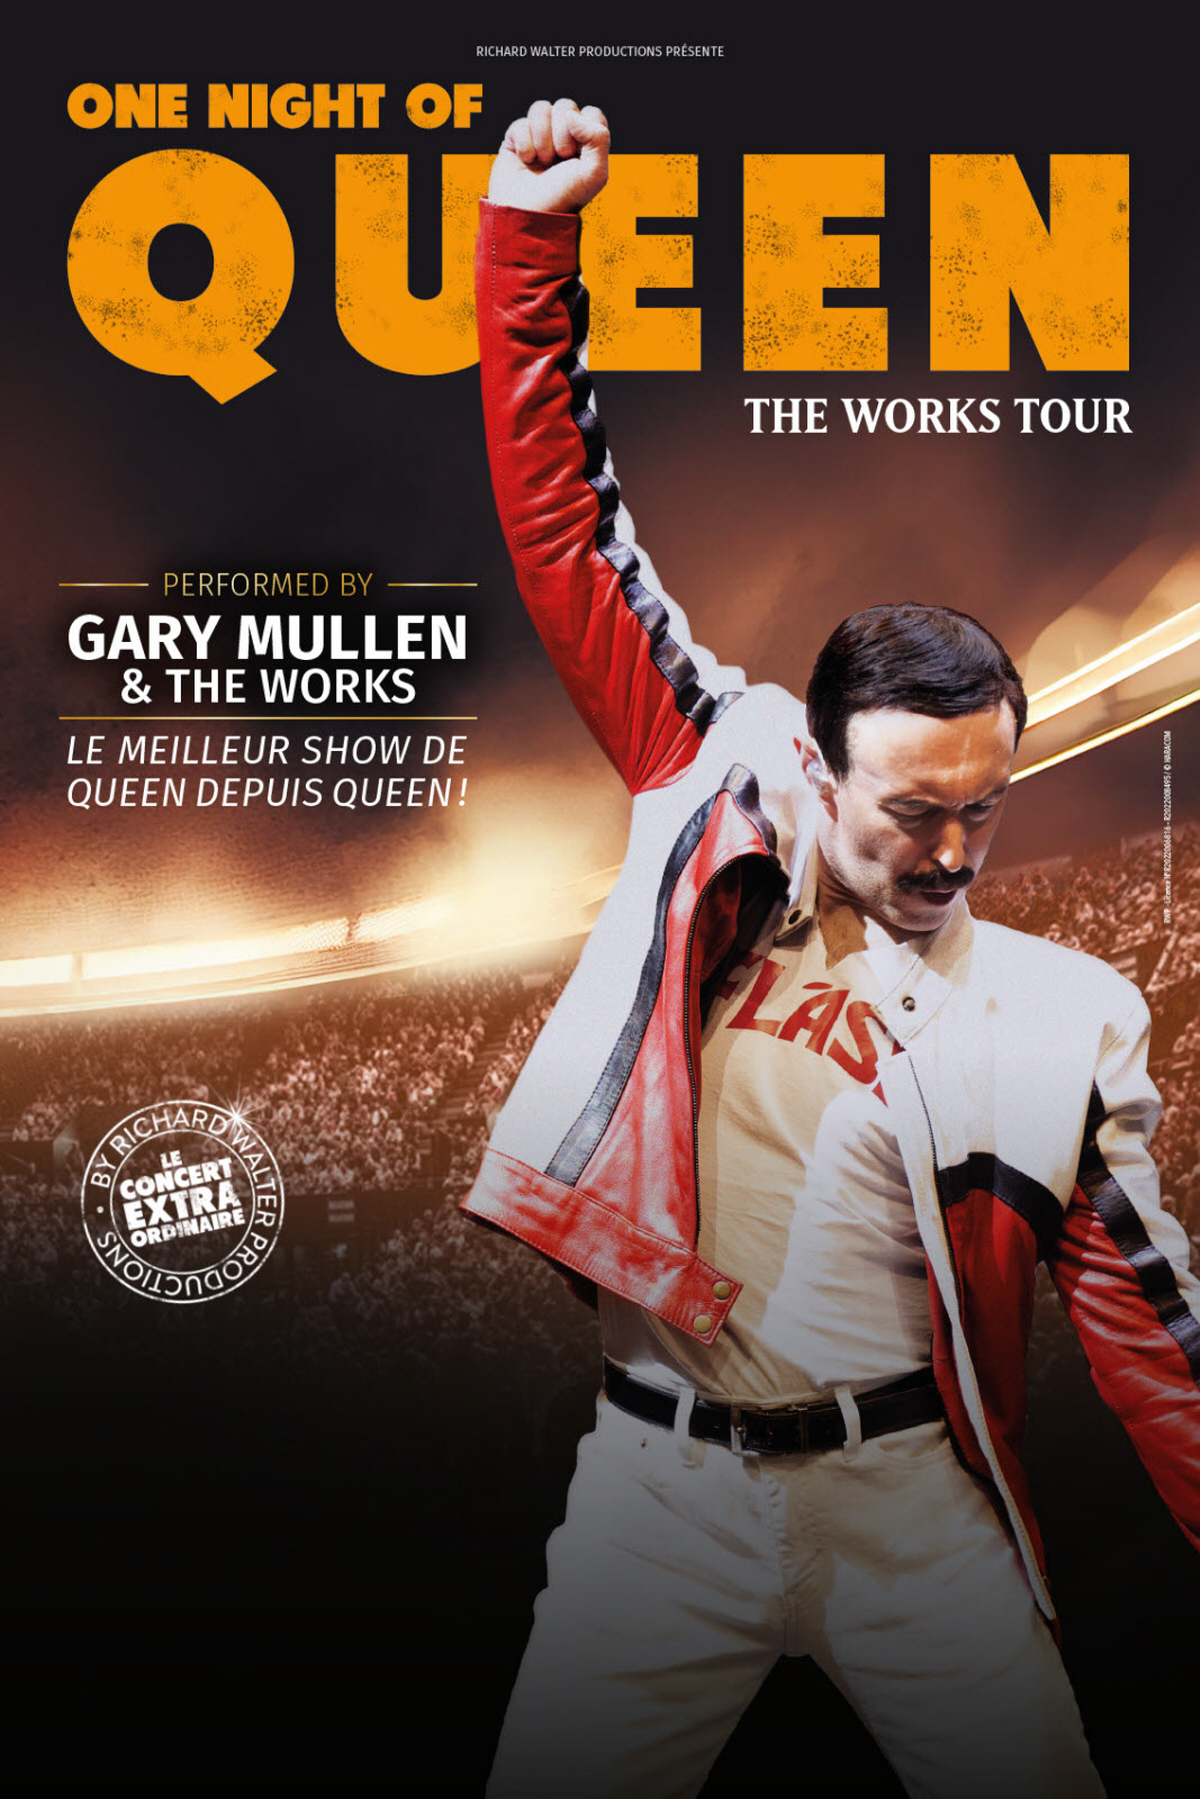 One Night Of Queen - The Works Tour in der M.a.ch 36 Tickets